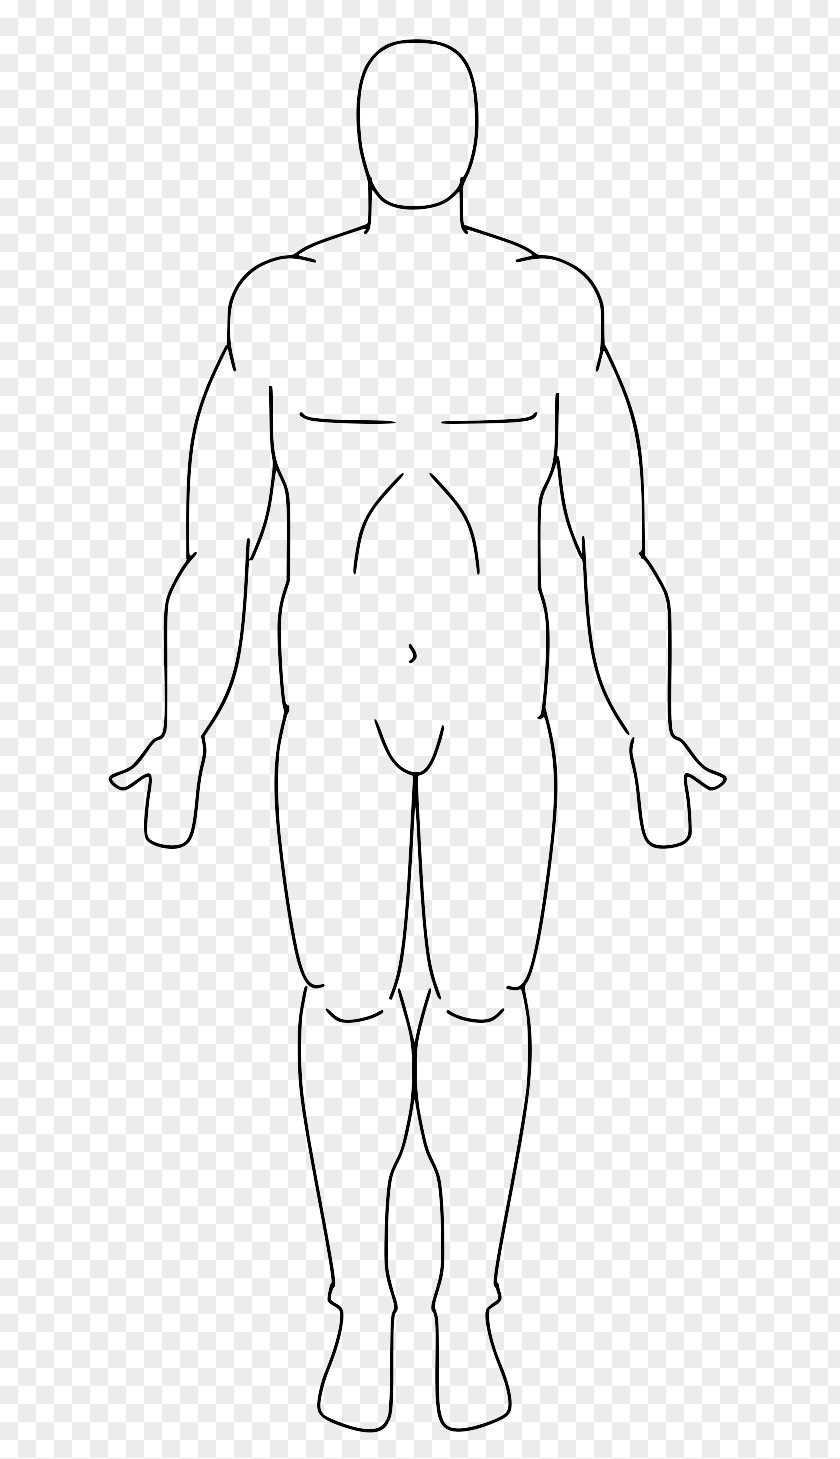 Lining Body Standard Anatomical Position Anatomy Human Facts Plane PNG